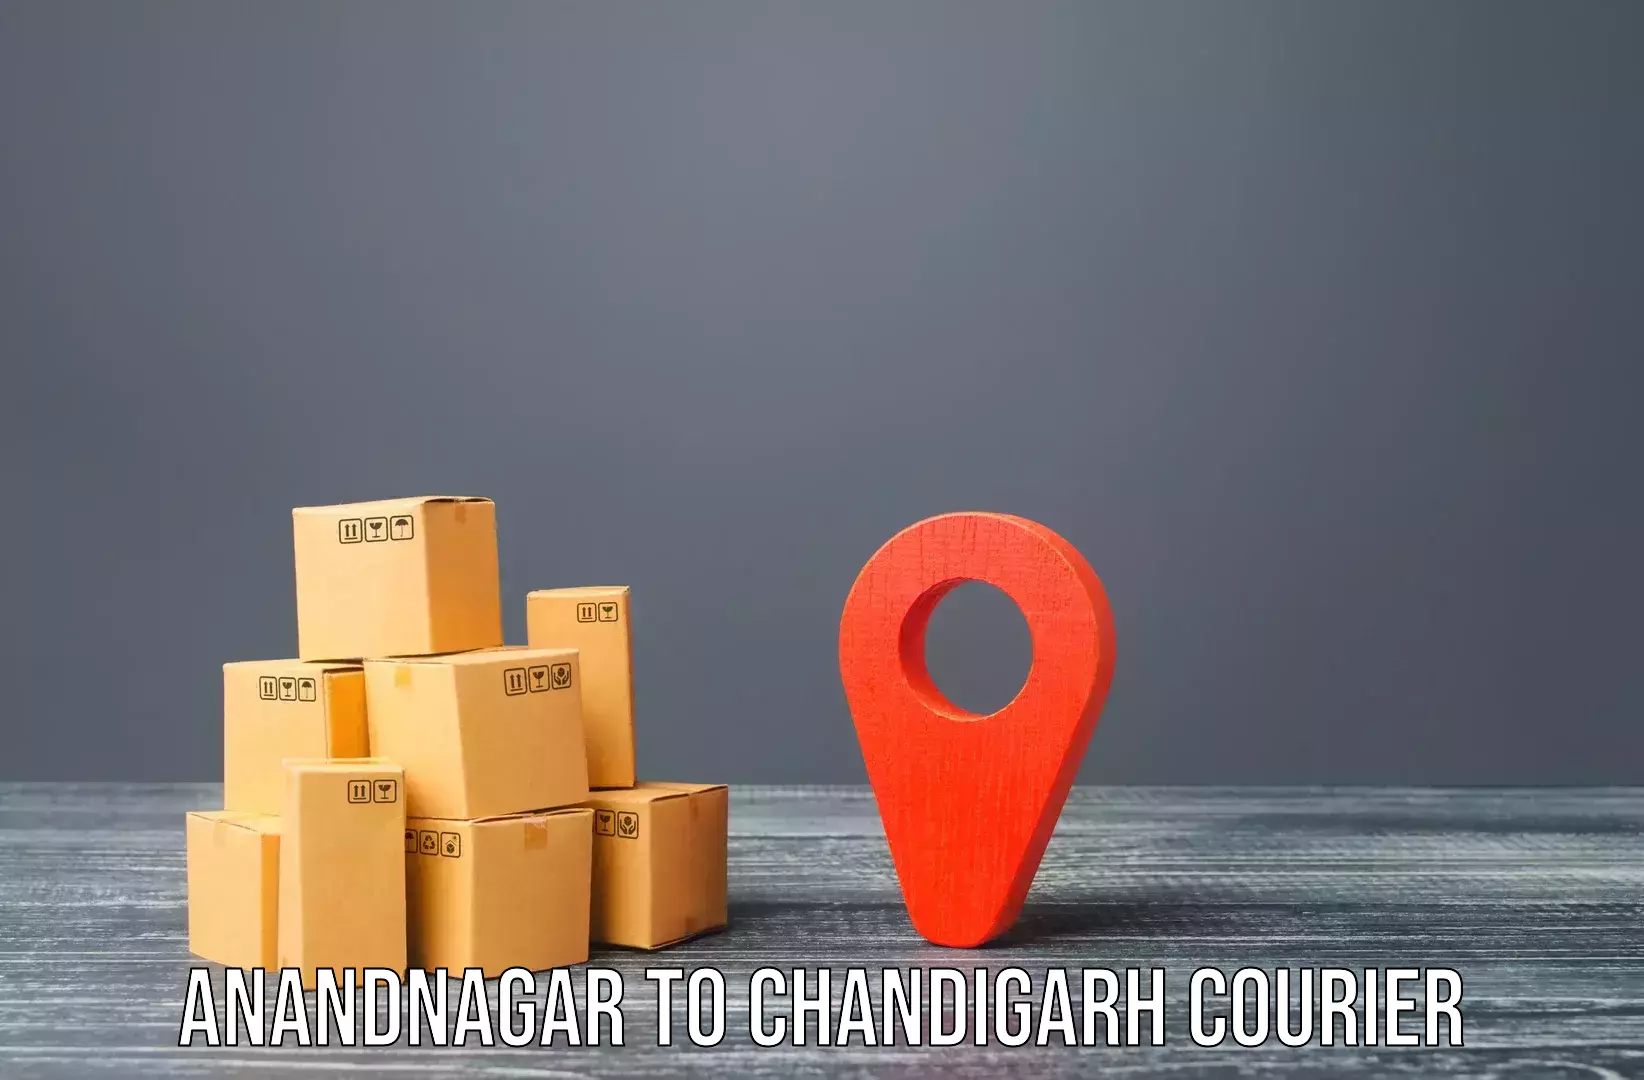 Quality moving company Anandnagar to Chandigarh